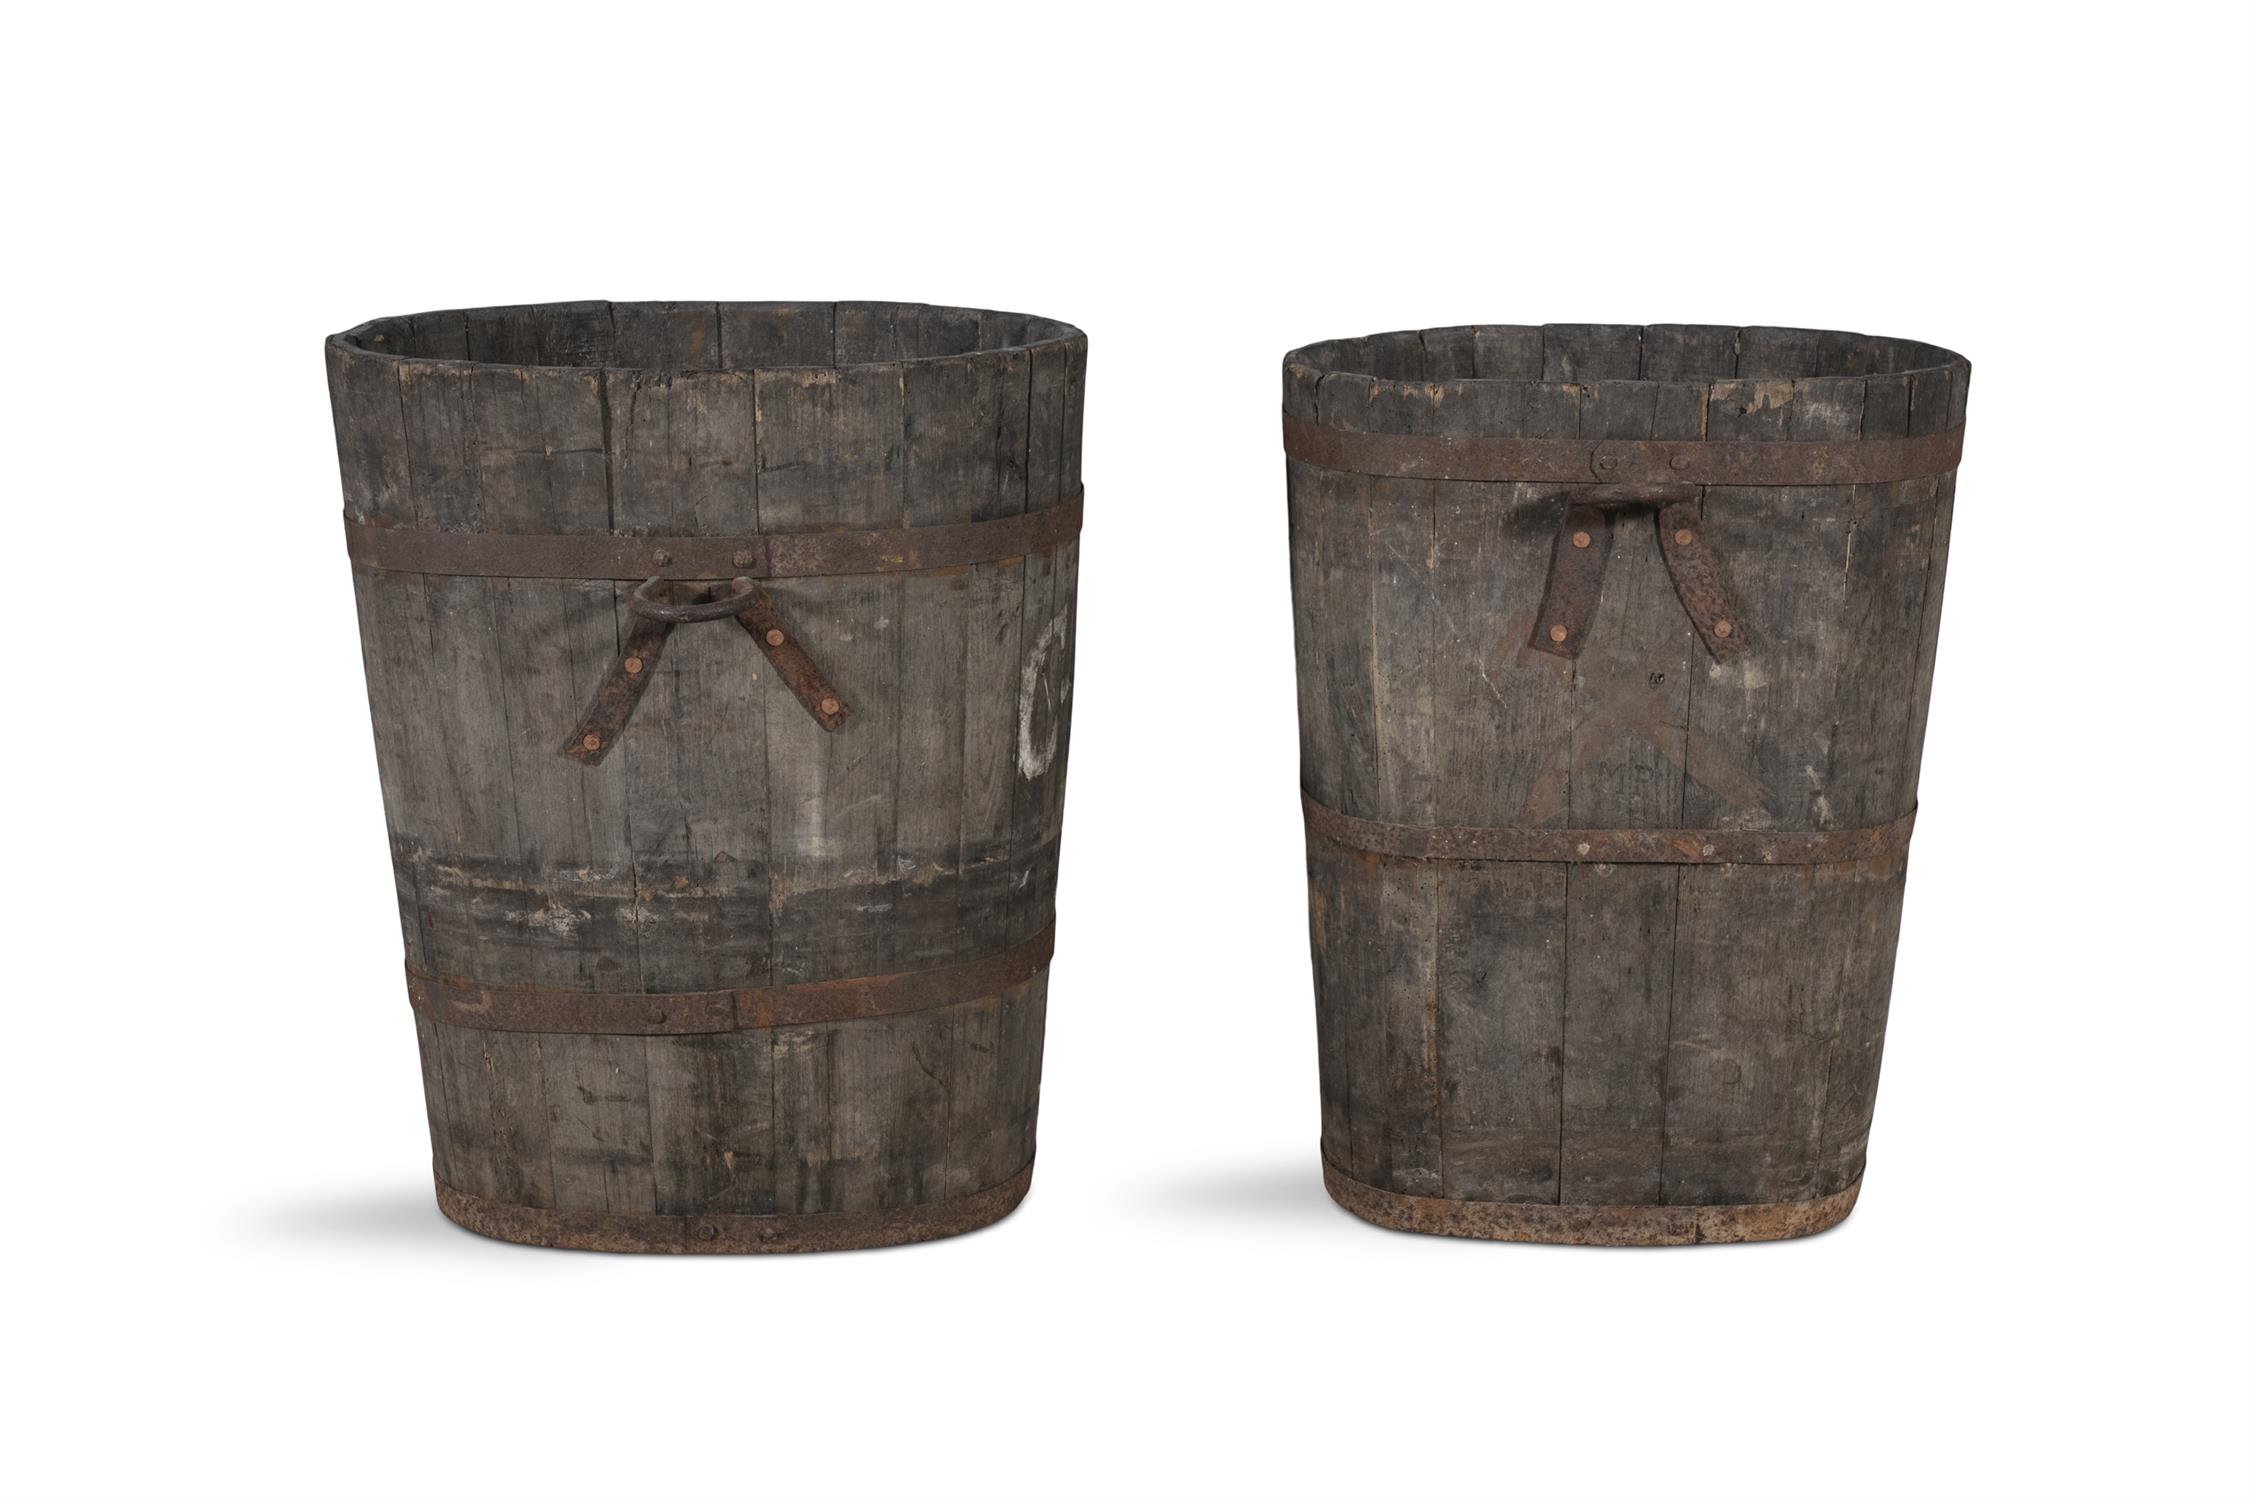 TWO 19TH CENTURY BRASS BANDED TURF BUCKETS, of shaped oval form and coopered construction, - Image 2 of 6